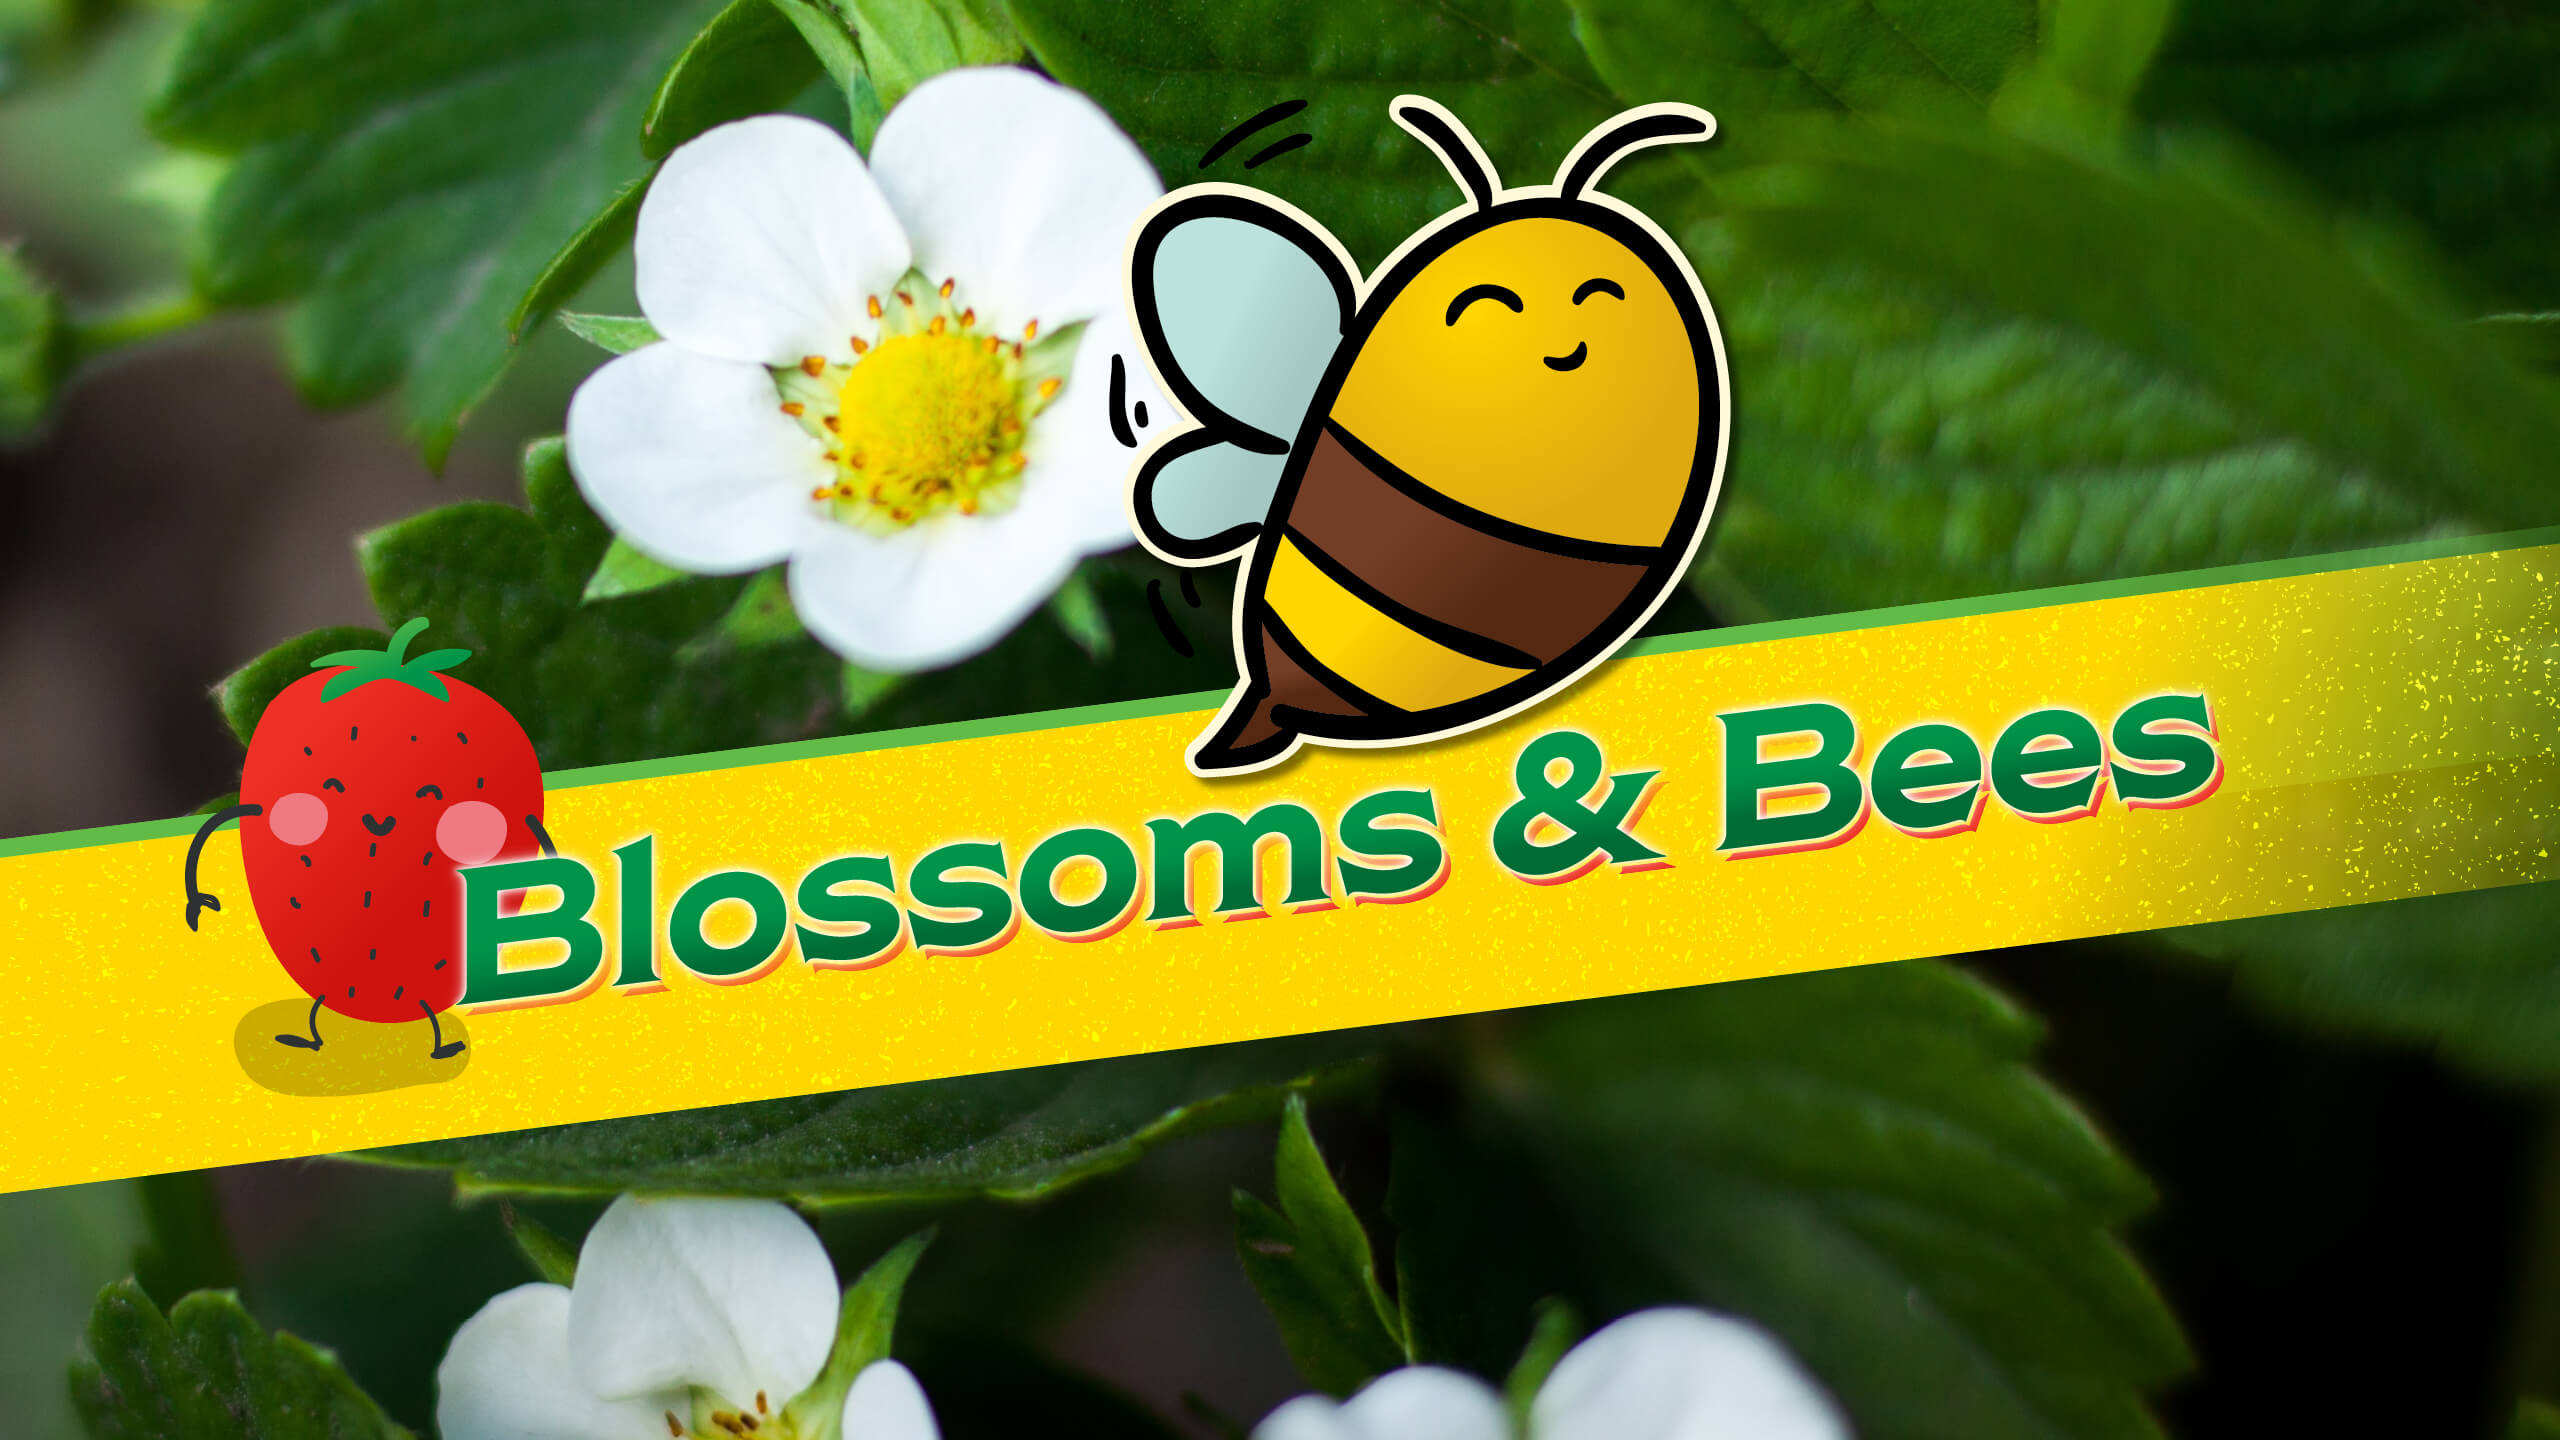 Blossoms & Bees educational children's program at Chiles Peach Orchard